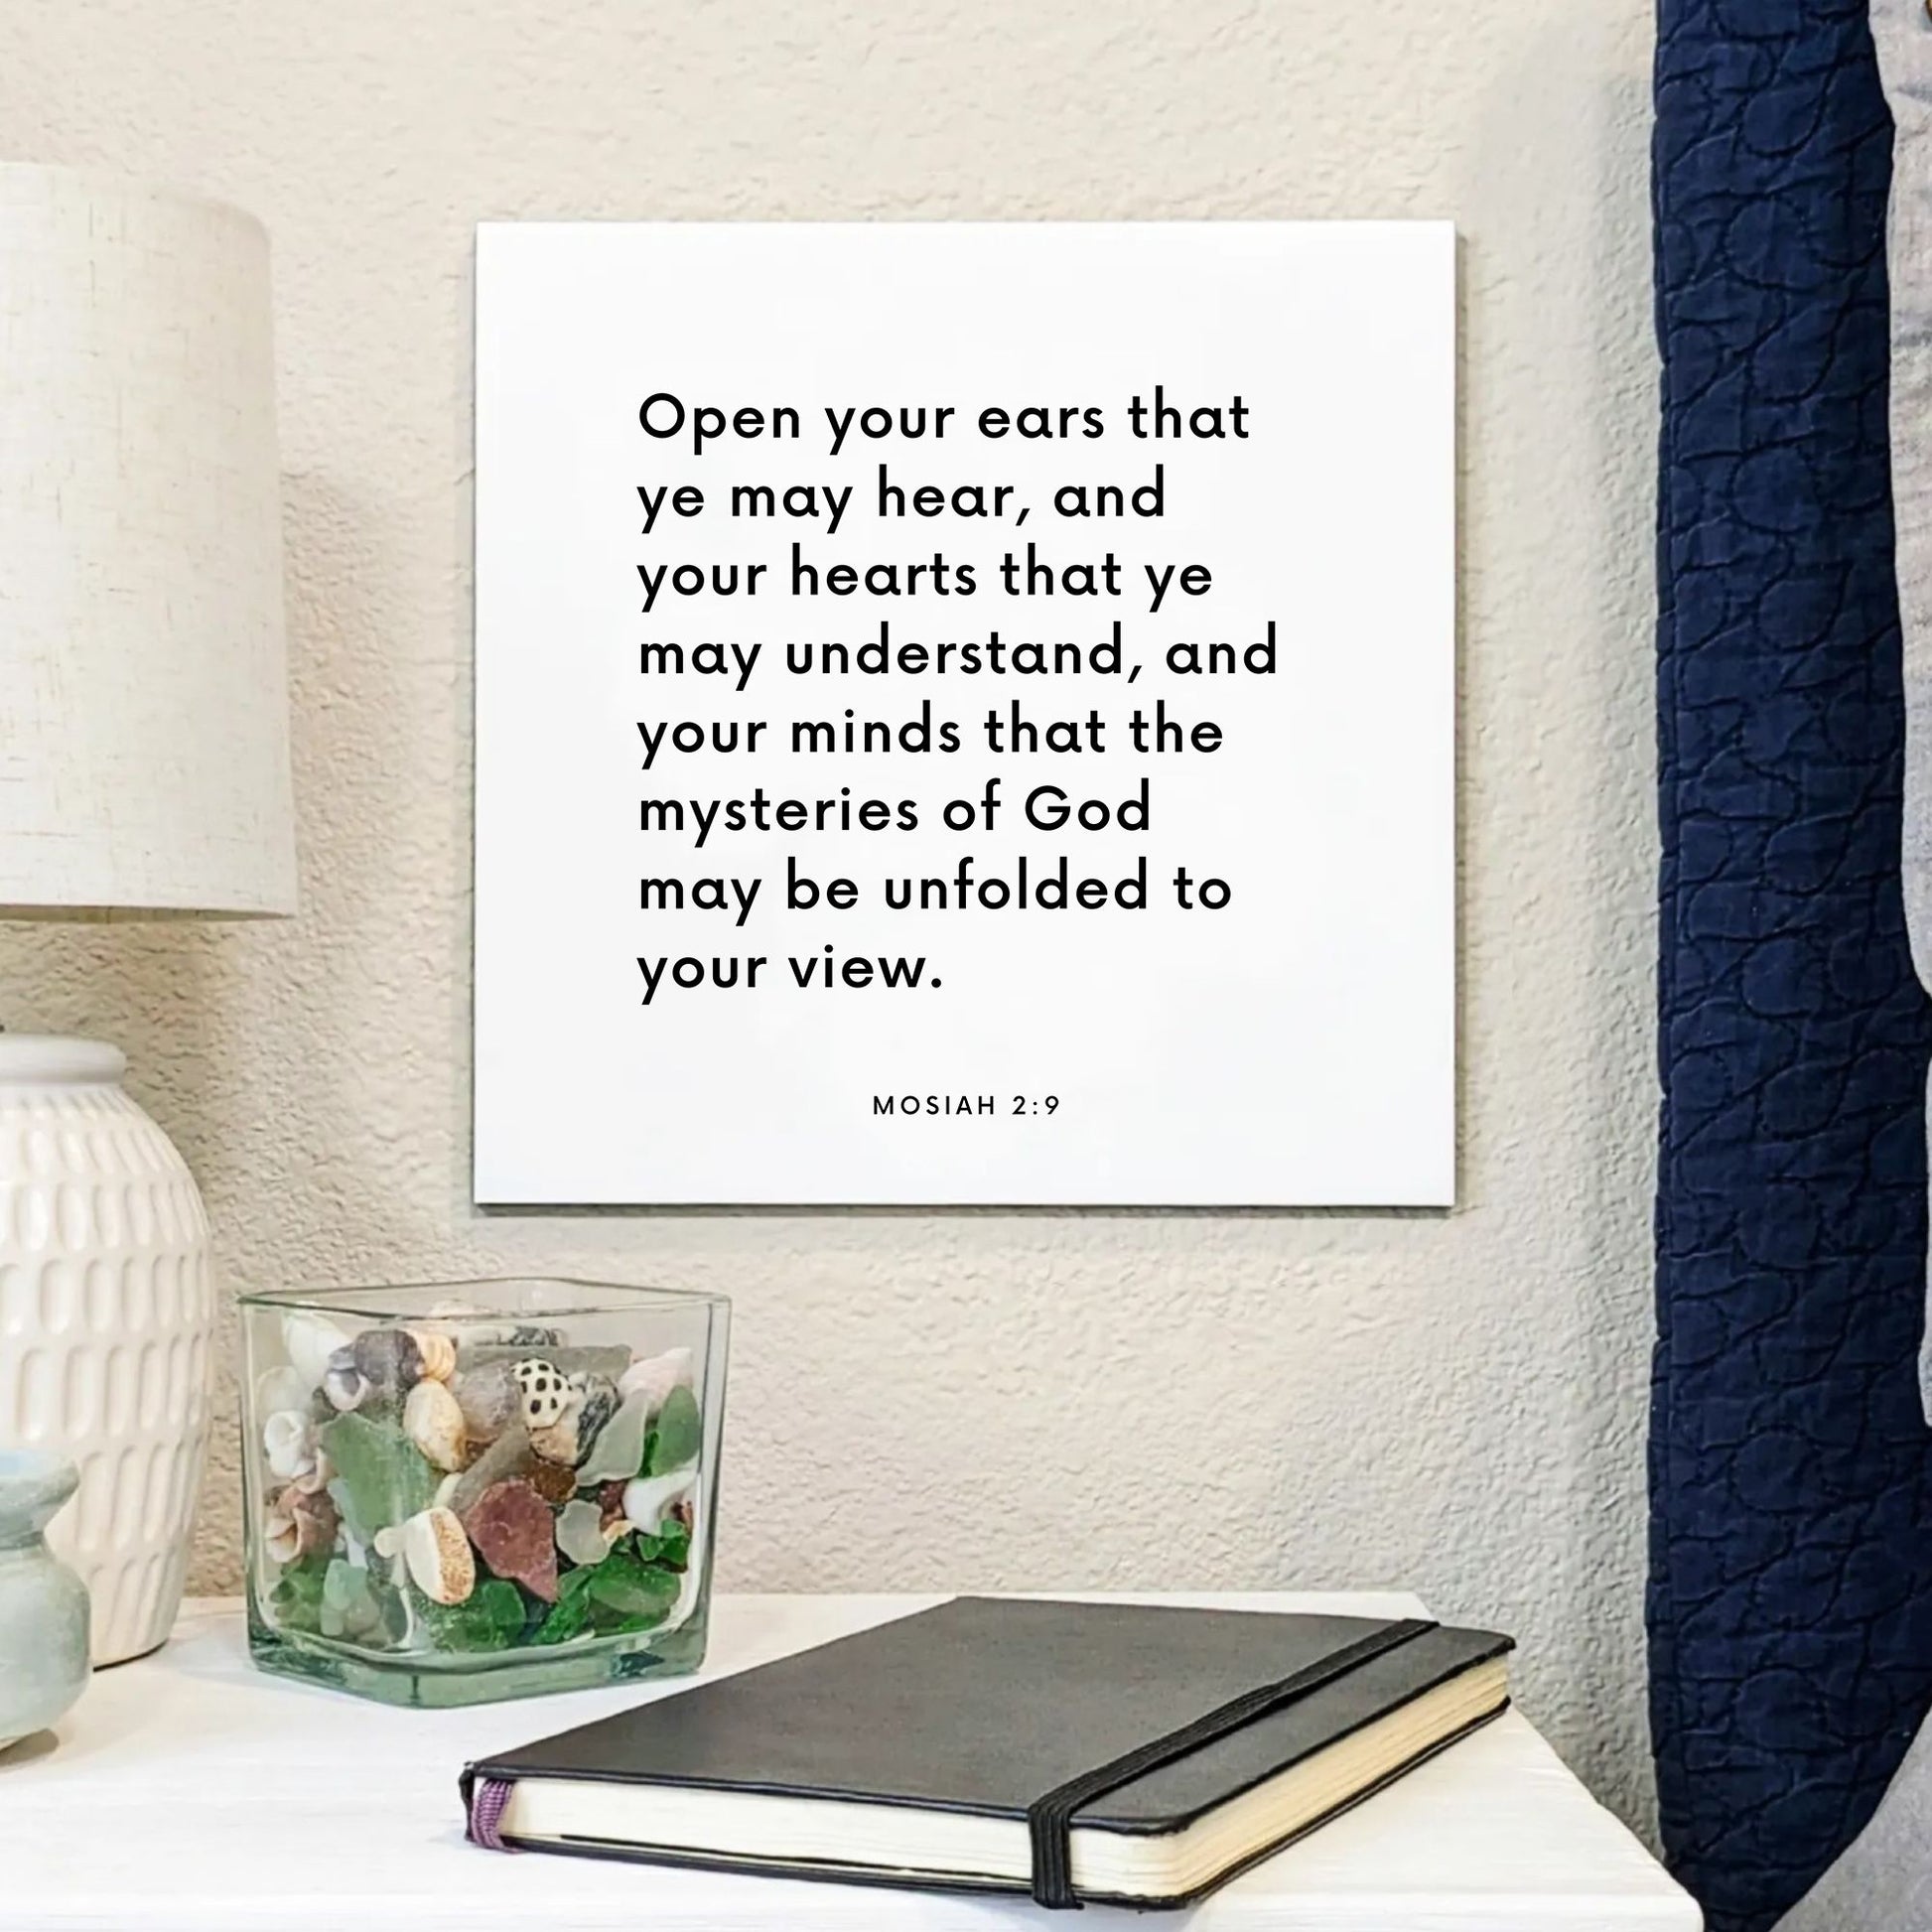 Bedside mouting of the scripture tile for Mosiah 2:9 - "Open your ears that ye may hear"